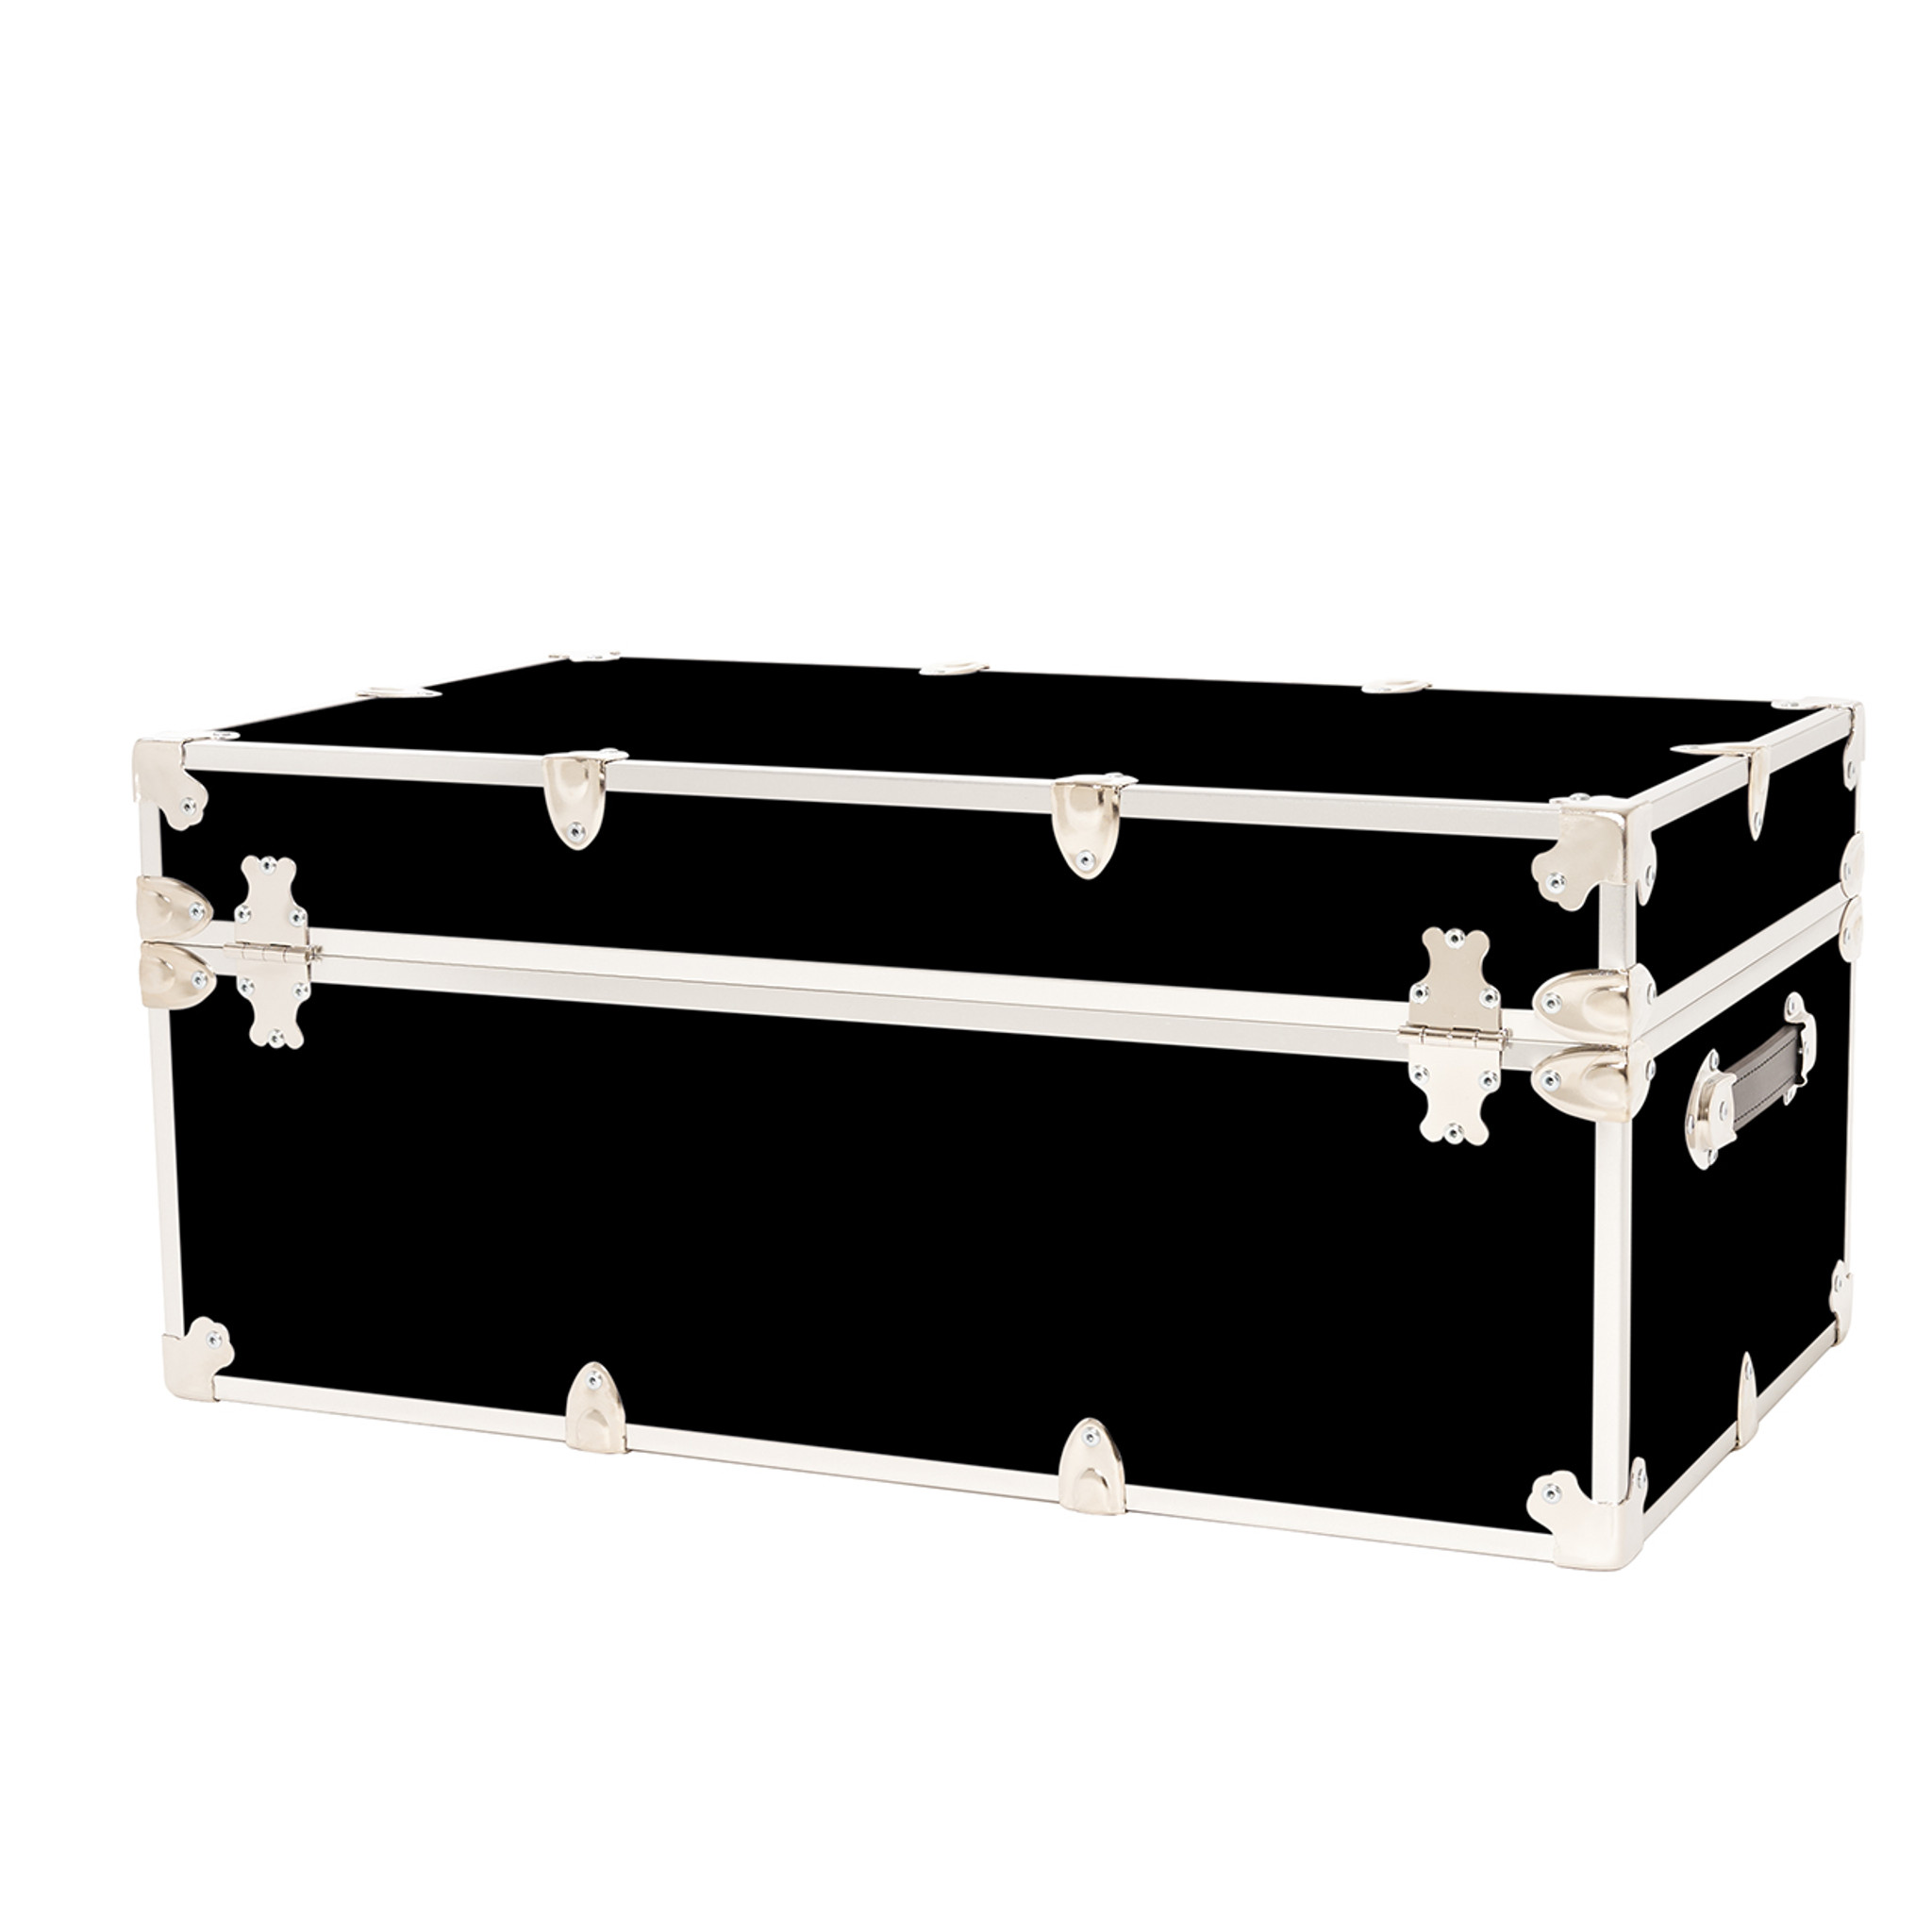 Rhino Trunk & Case  Manufacturer of Quality Storage Trunks & Cases